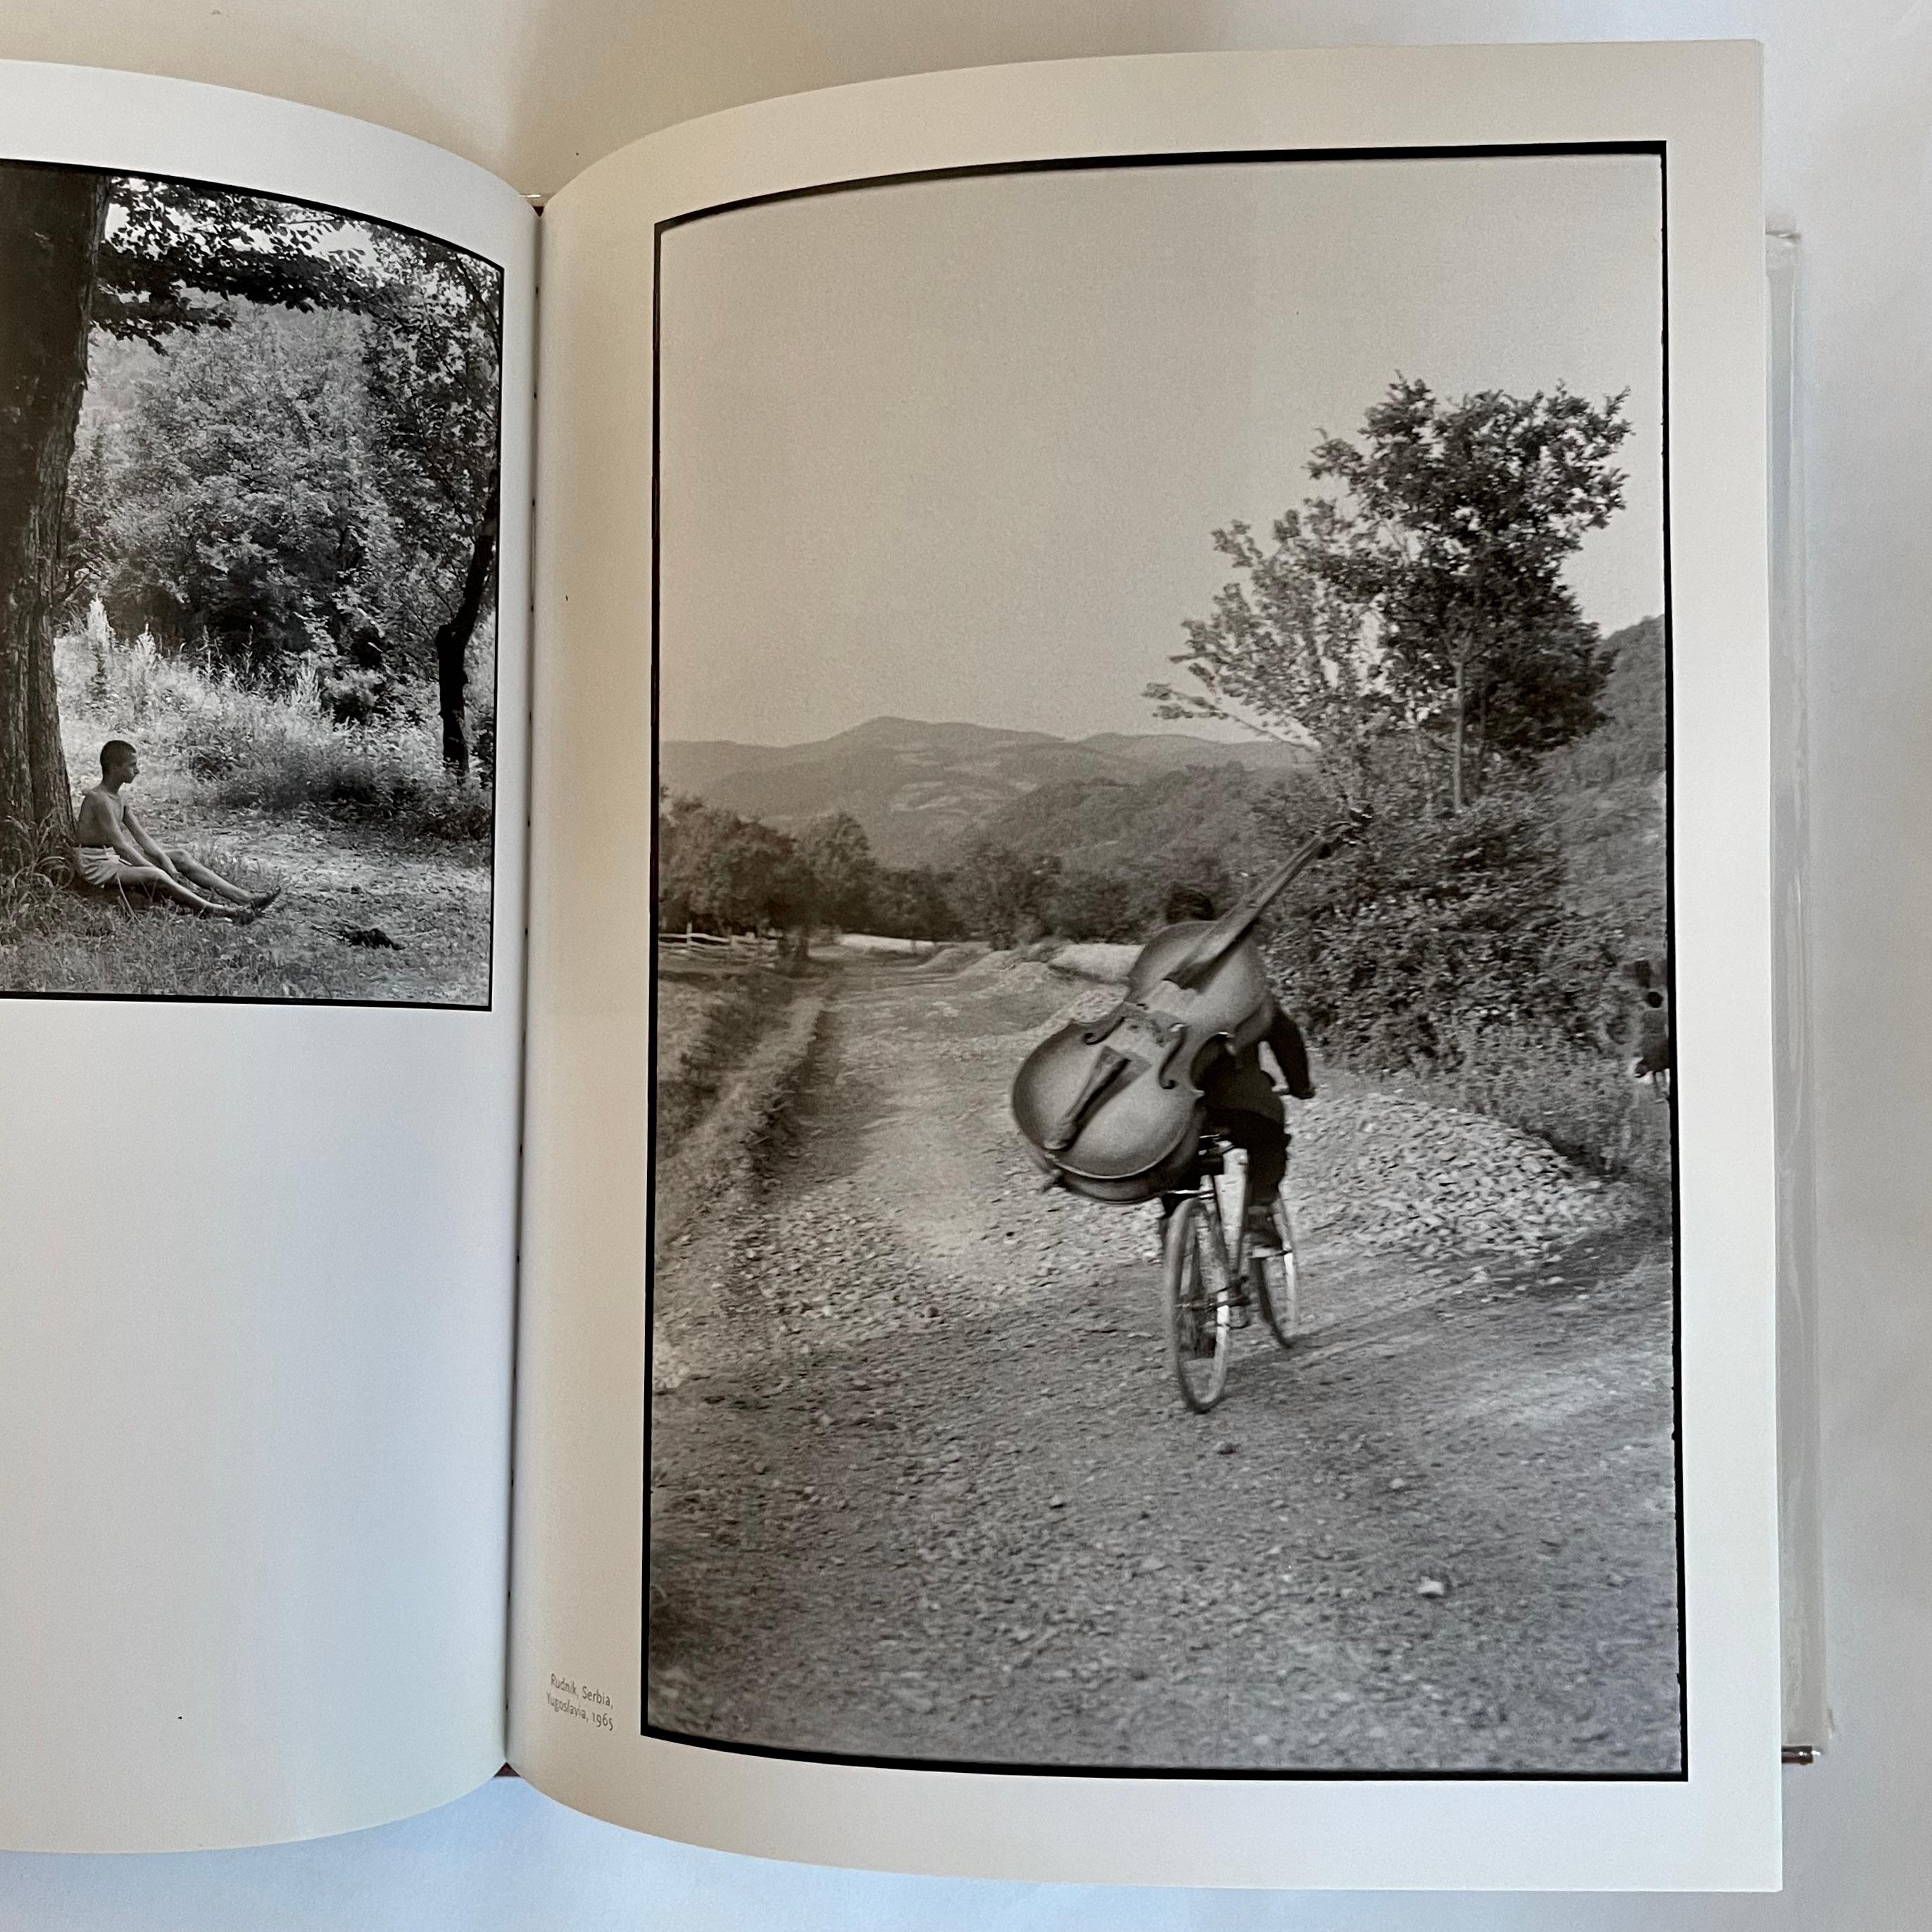 First English Edition, published by Thames & Hudson, 1997. Text by Jean Clair.

Over forty years after first publishing his 1955 collection of photographs exploring the ruins and privations of a people and landscape then shadowed by war,